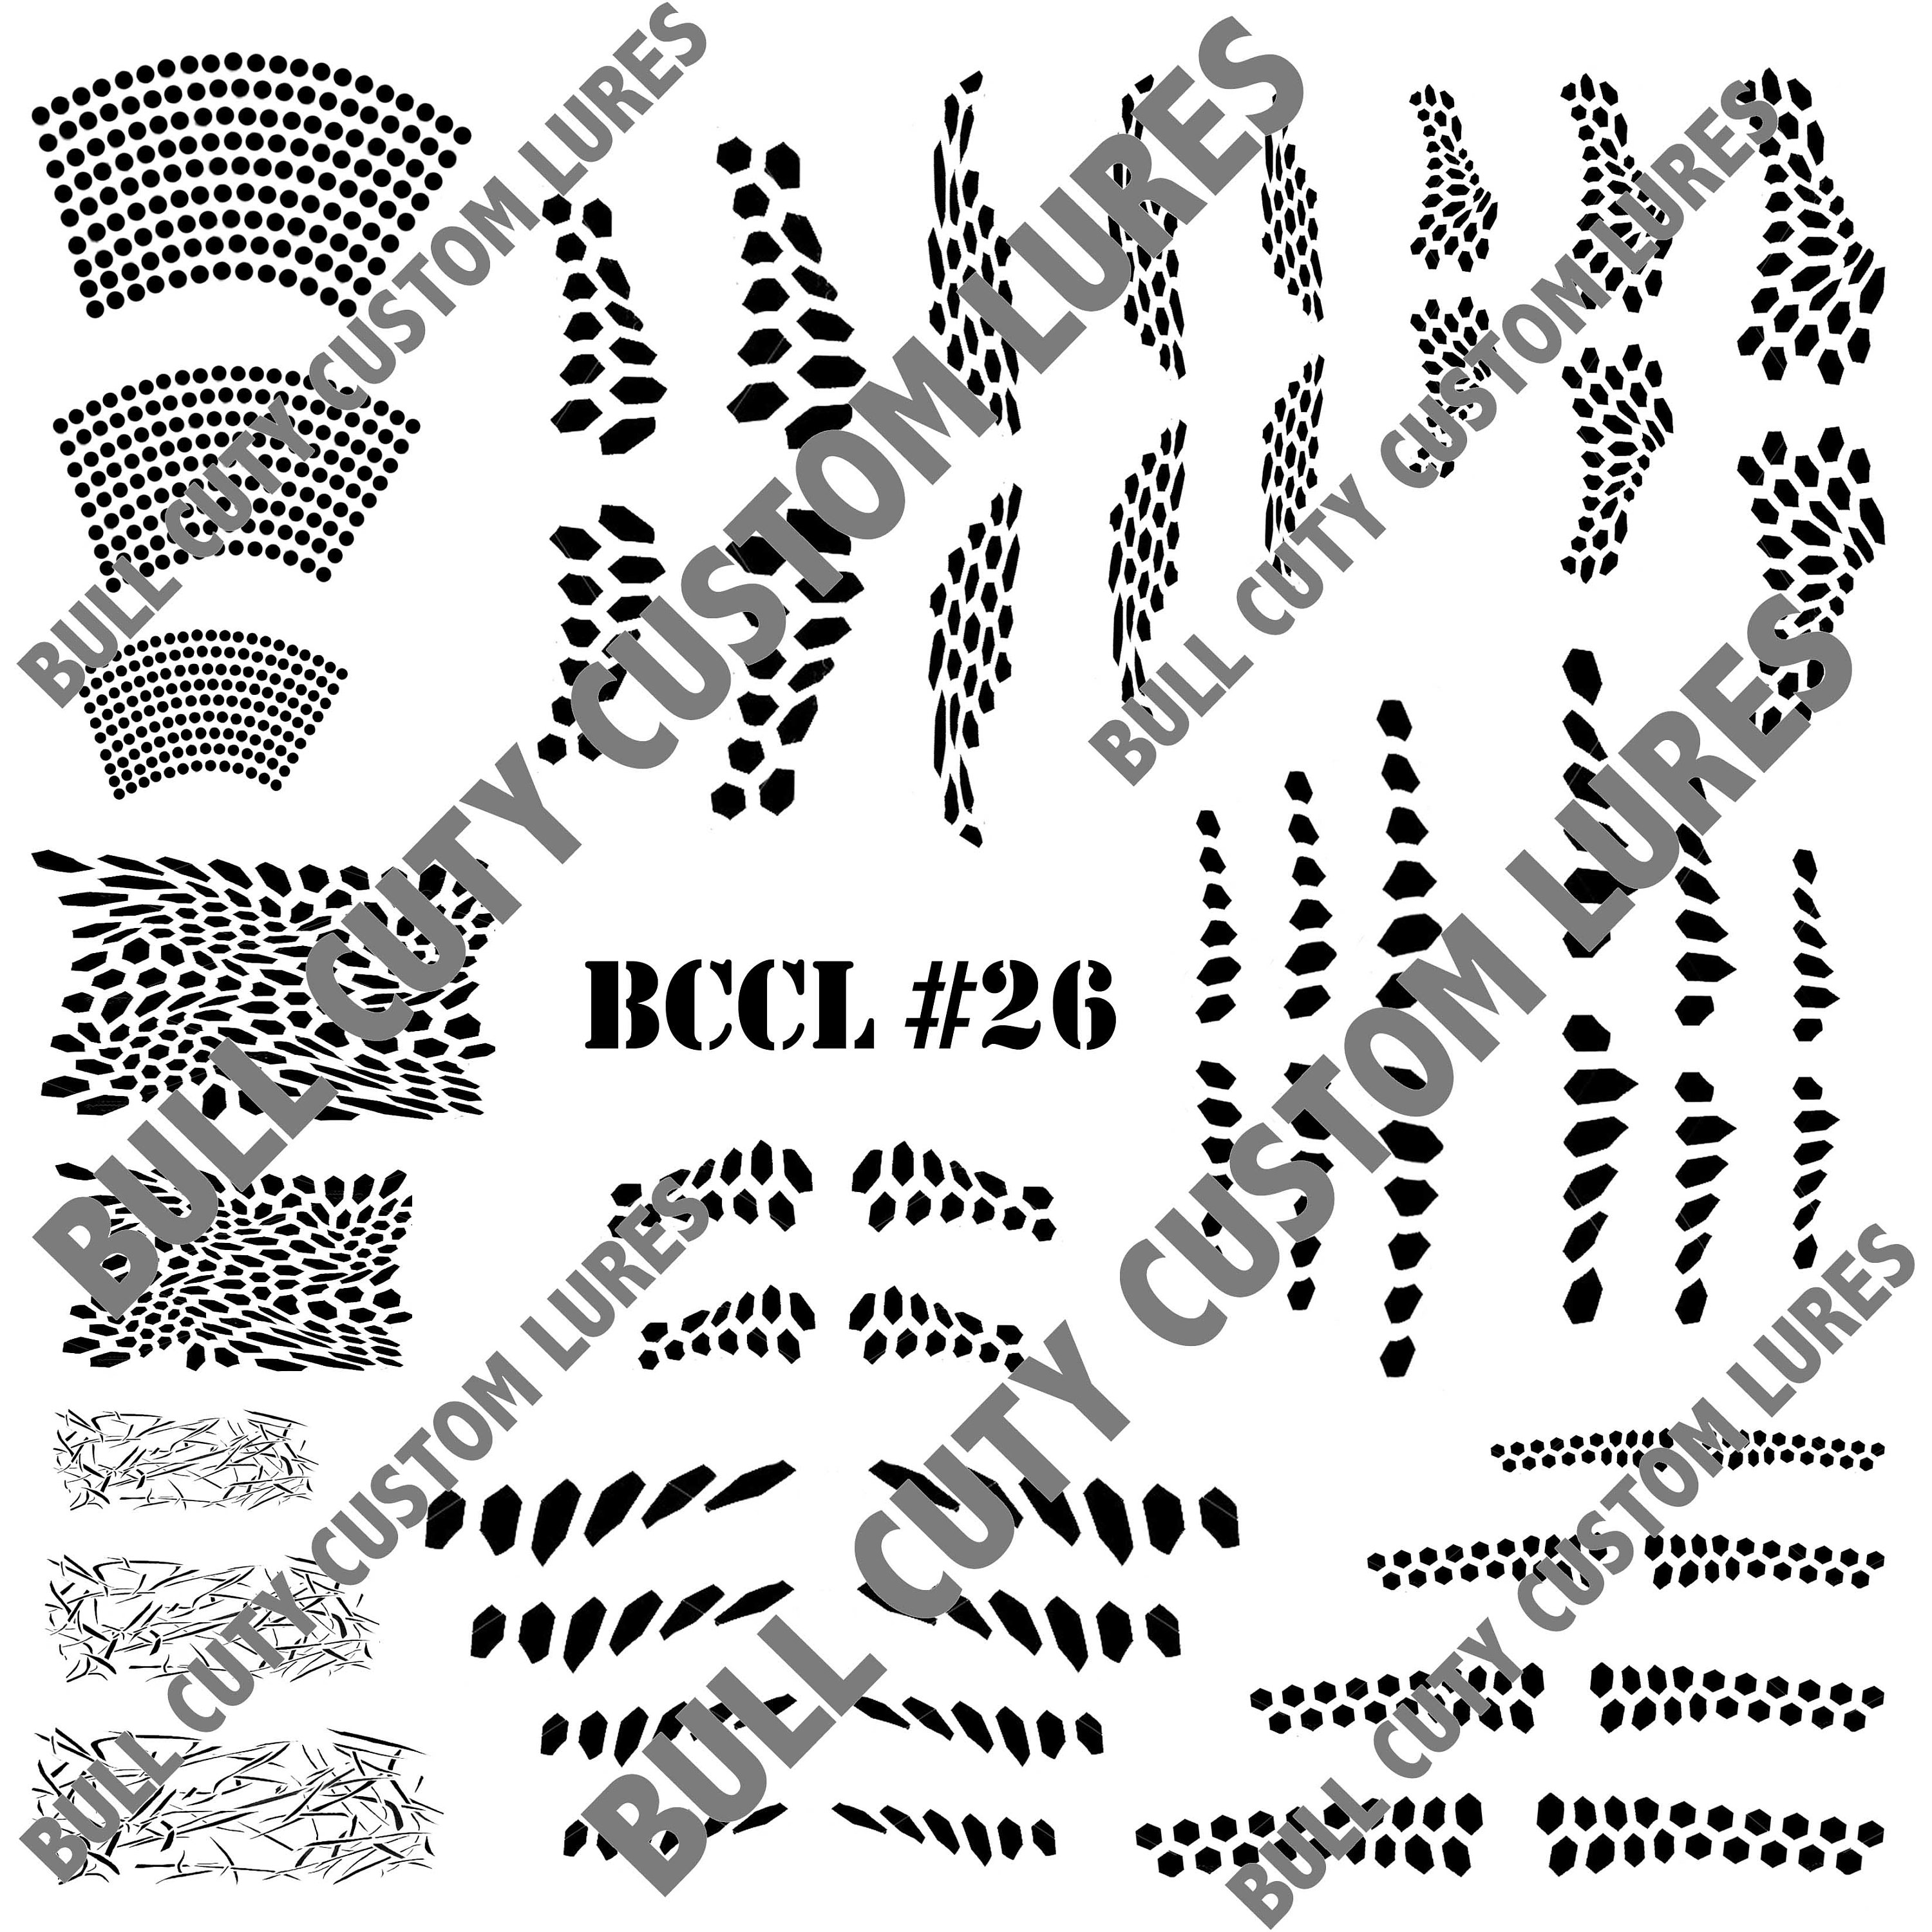 BCCL Lure Stencils #26 Crankbait Jerkbait Topwater Bass Fishing Painting  Scales Patterns Dots Circles Hexagon Camo Lines Stripes Air Brush